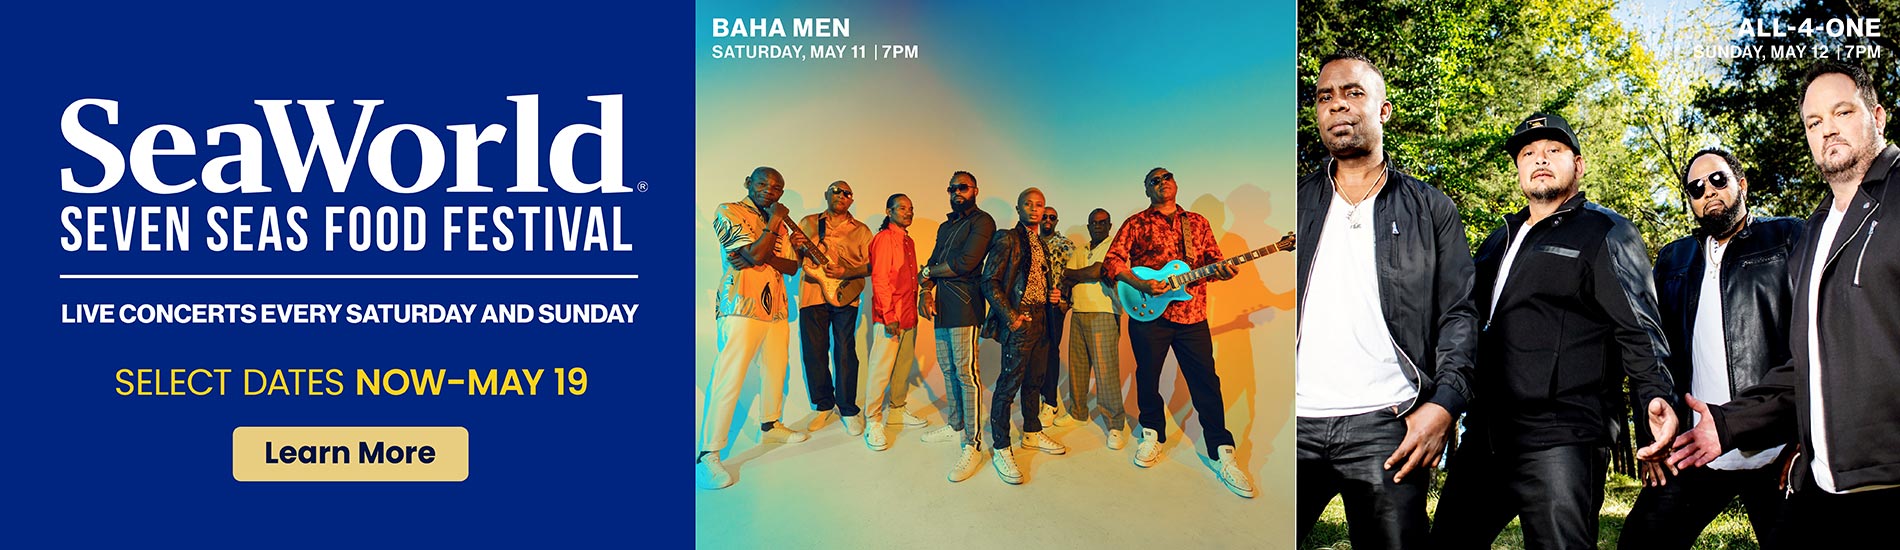 Baha Men and All-4-One performing at SeaWorld Seven Seas Food Festival